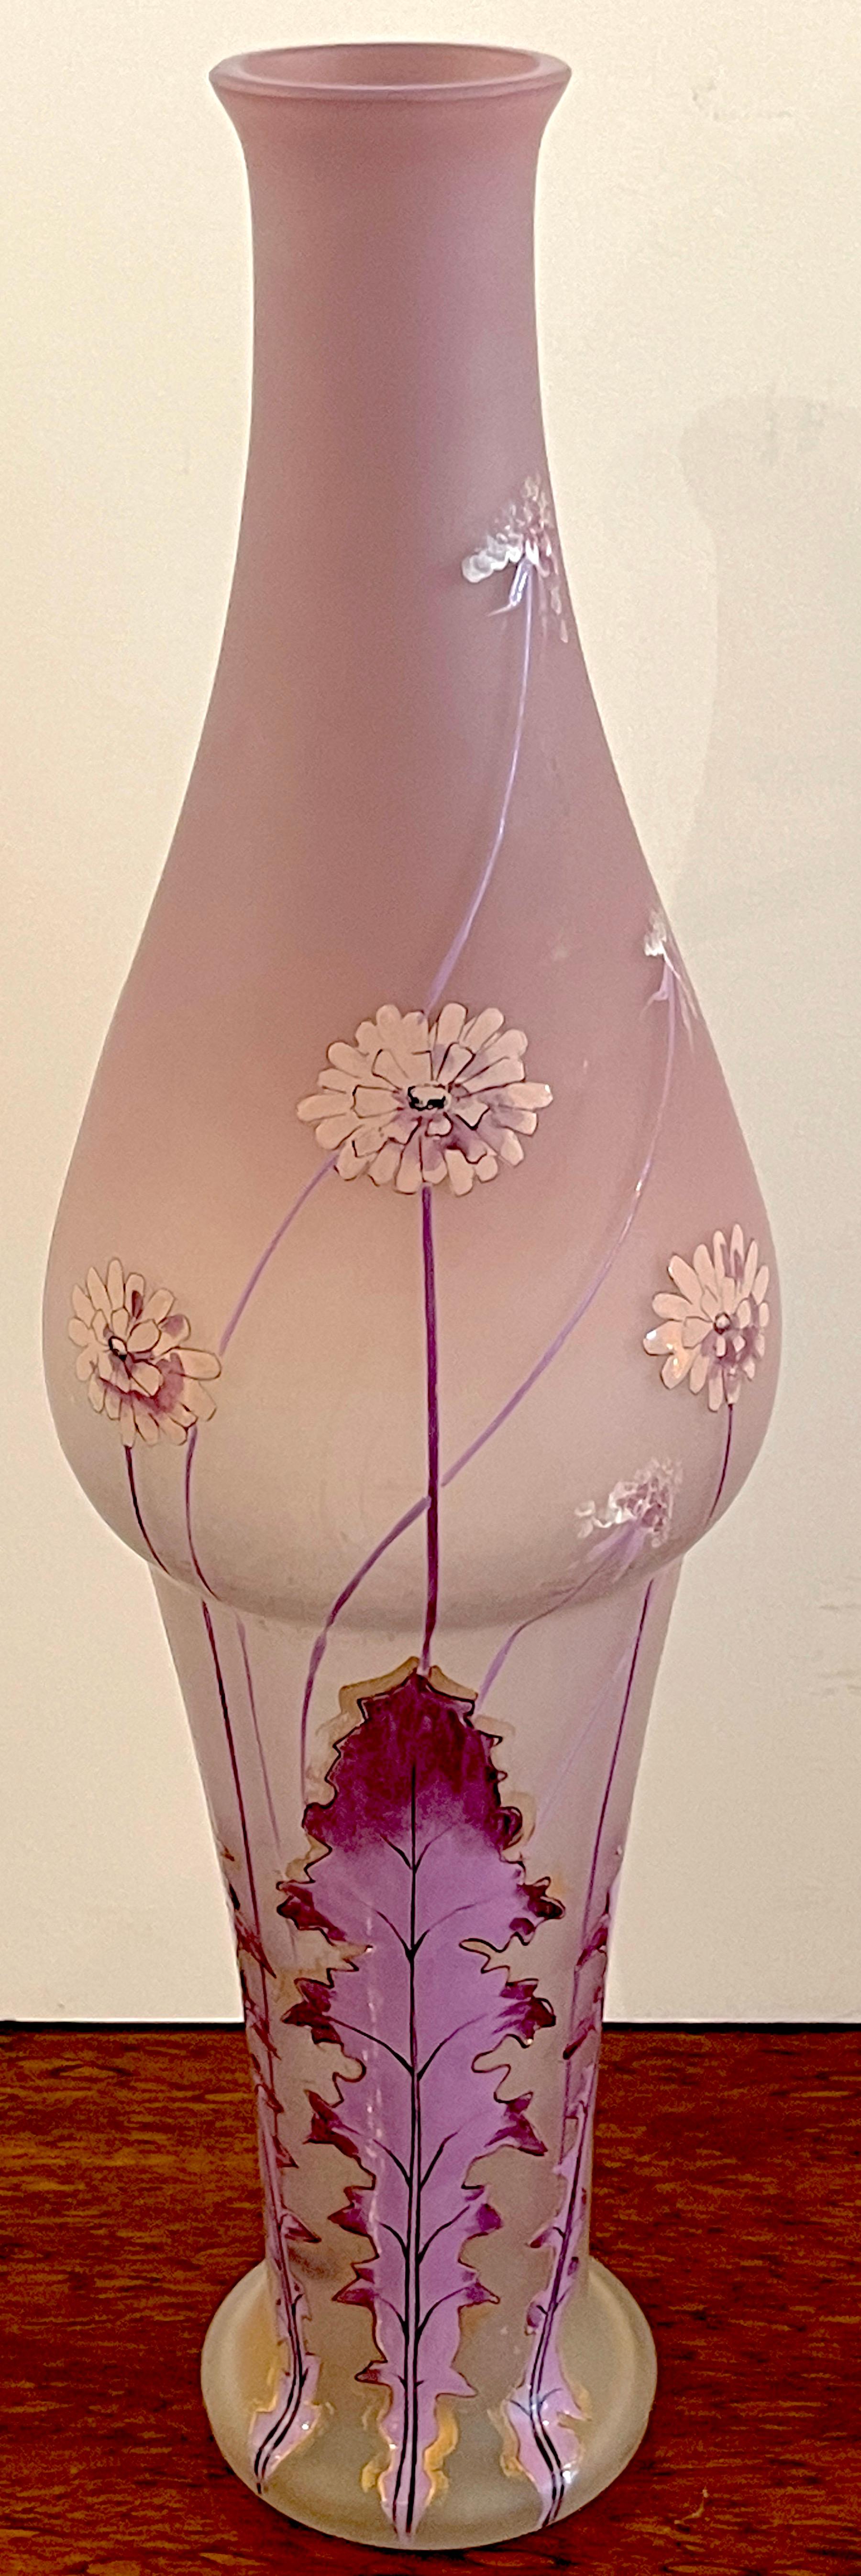 Art Nouveau Lavender Dandelion (Taraxacum) Enameled Vase, 
Attributed to the Mont Joye Glassworks 
France, Circa 1900s
A unique work with the elongated neck and bulbous body resting on a tapering pedestal base.Realistically enameled with flowing